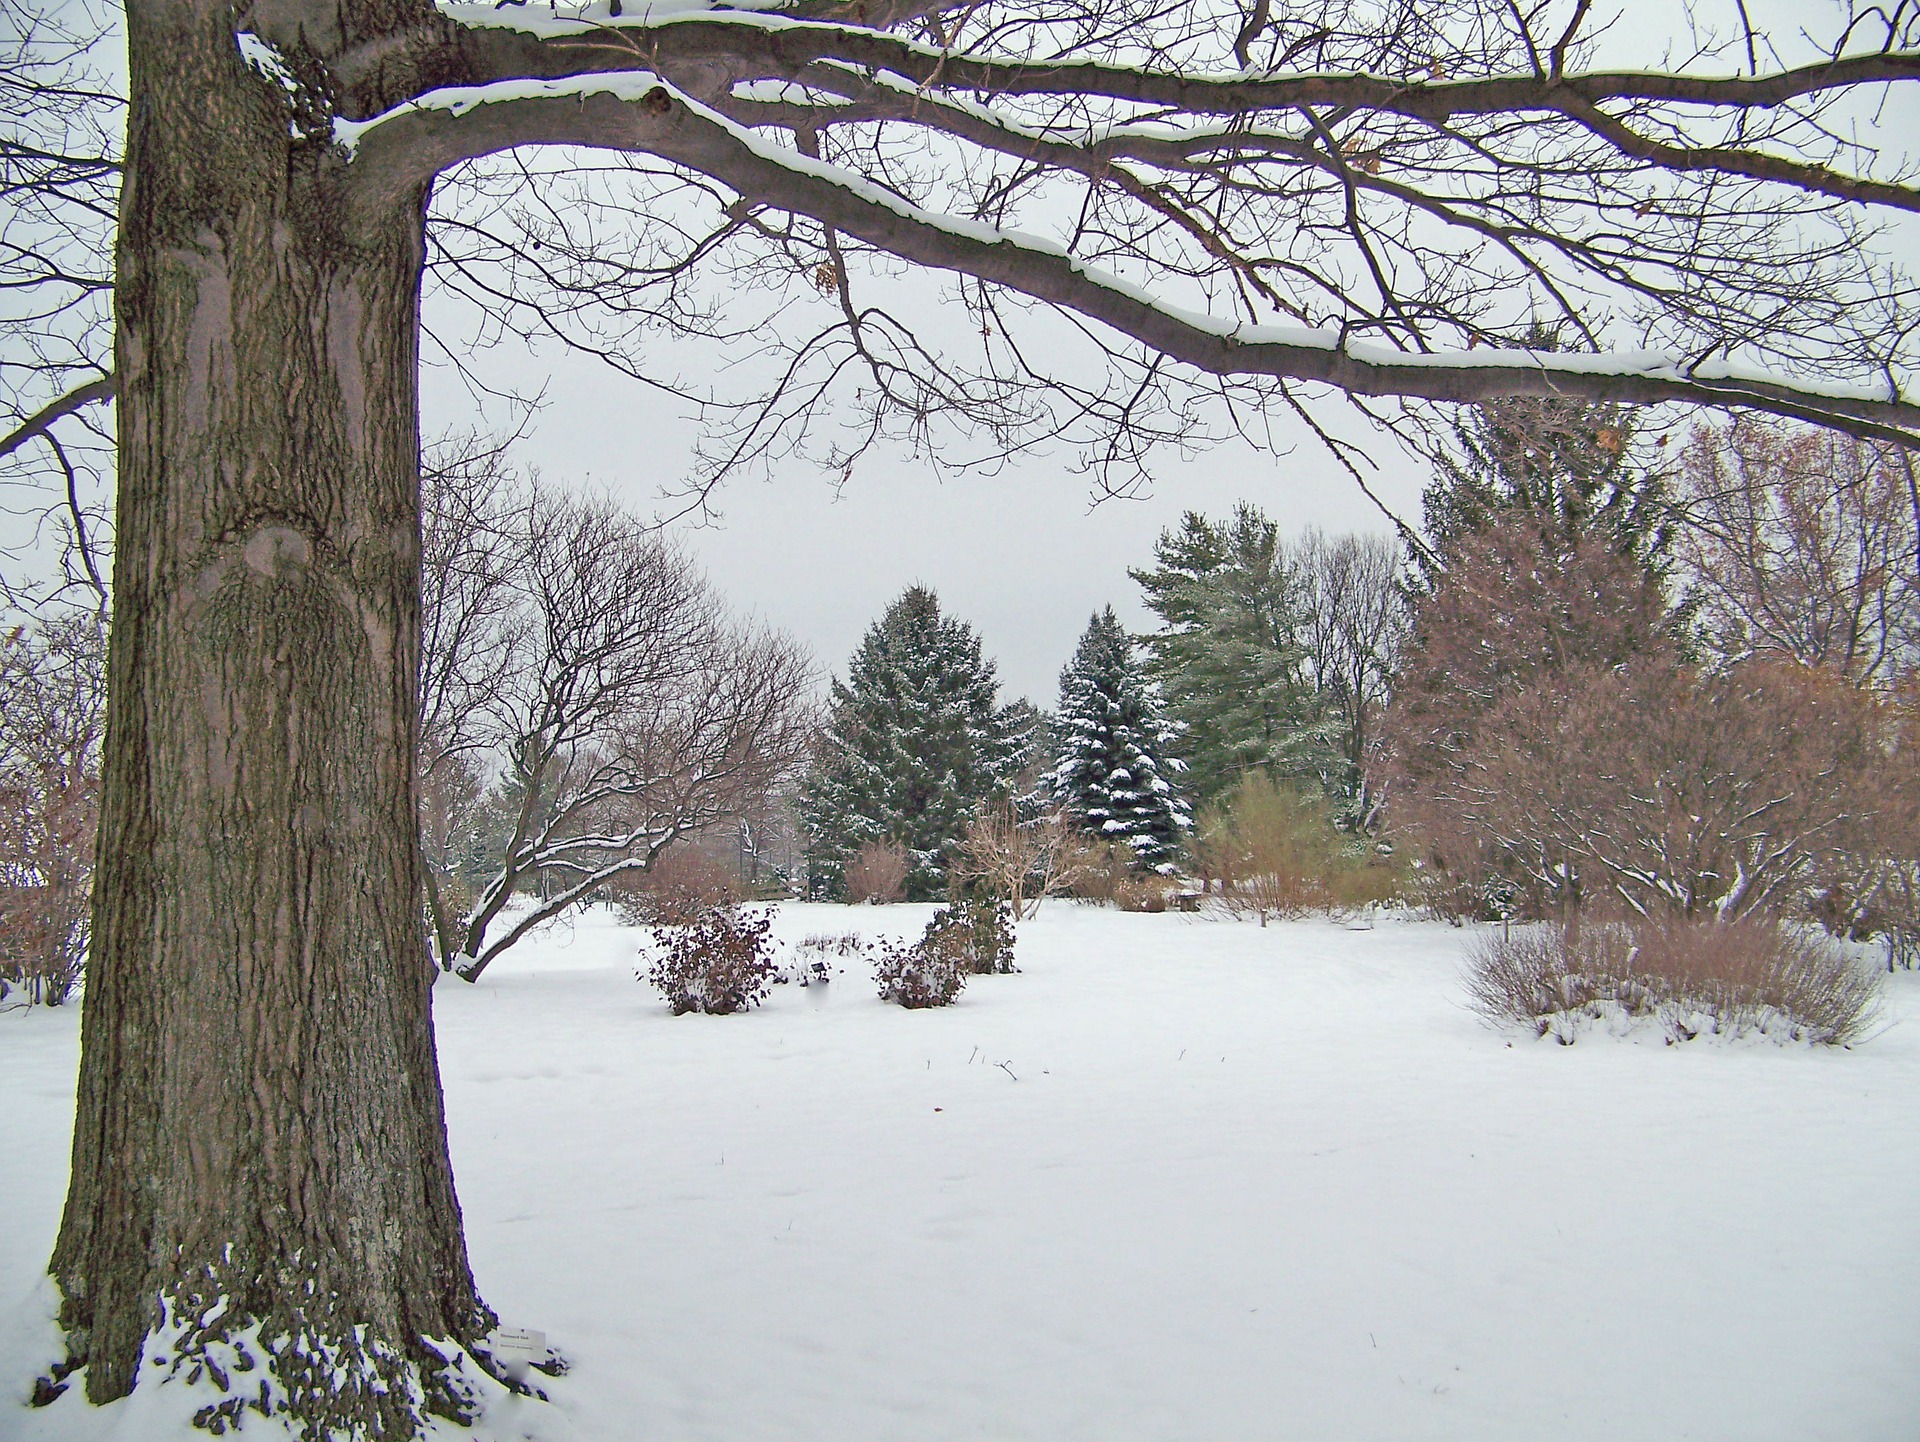 A light dusting of snow on a variety of plants and trees in an Ohio yard